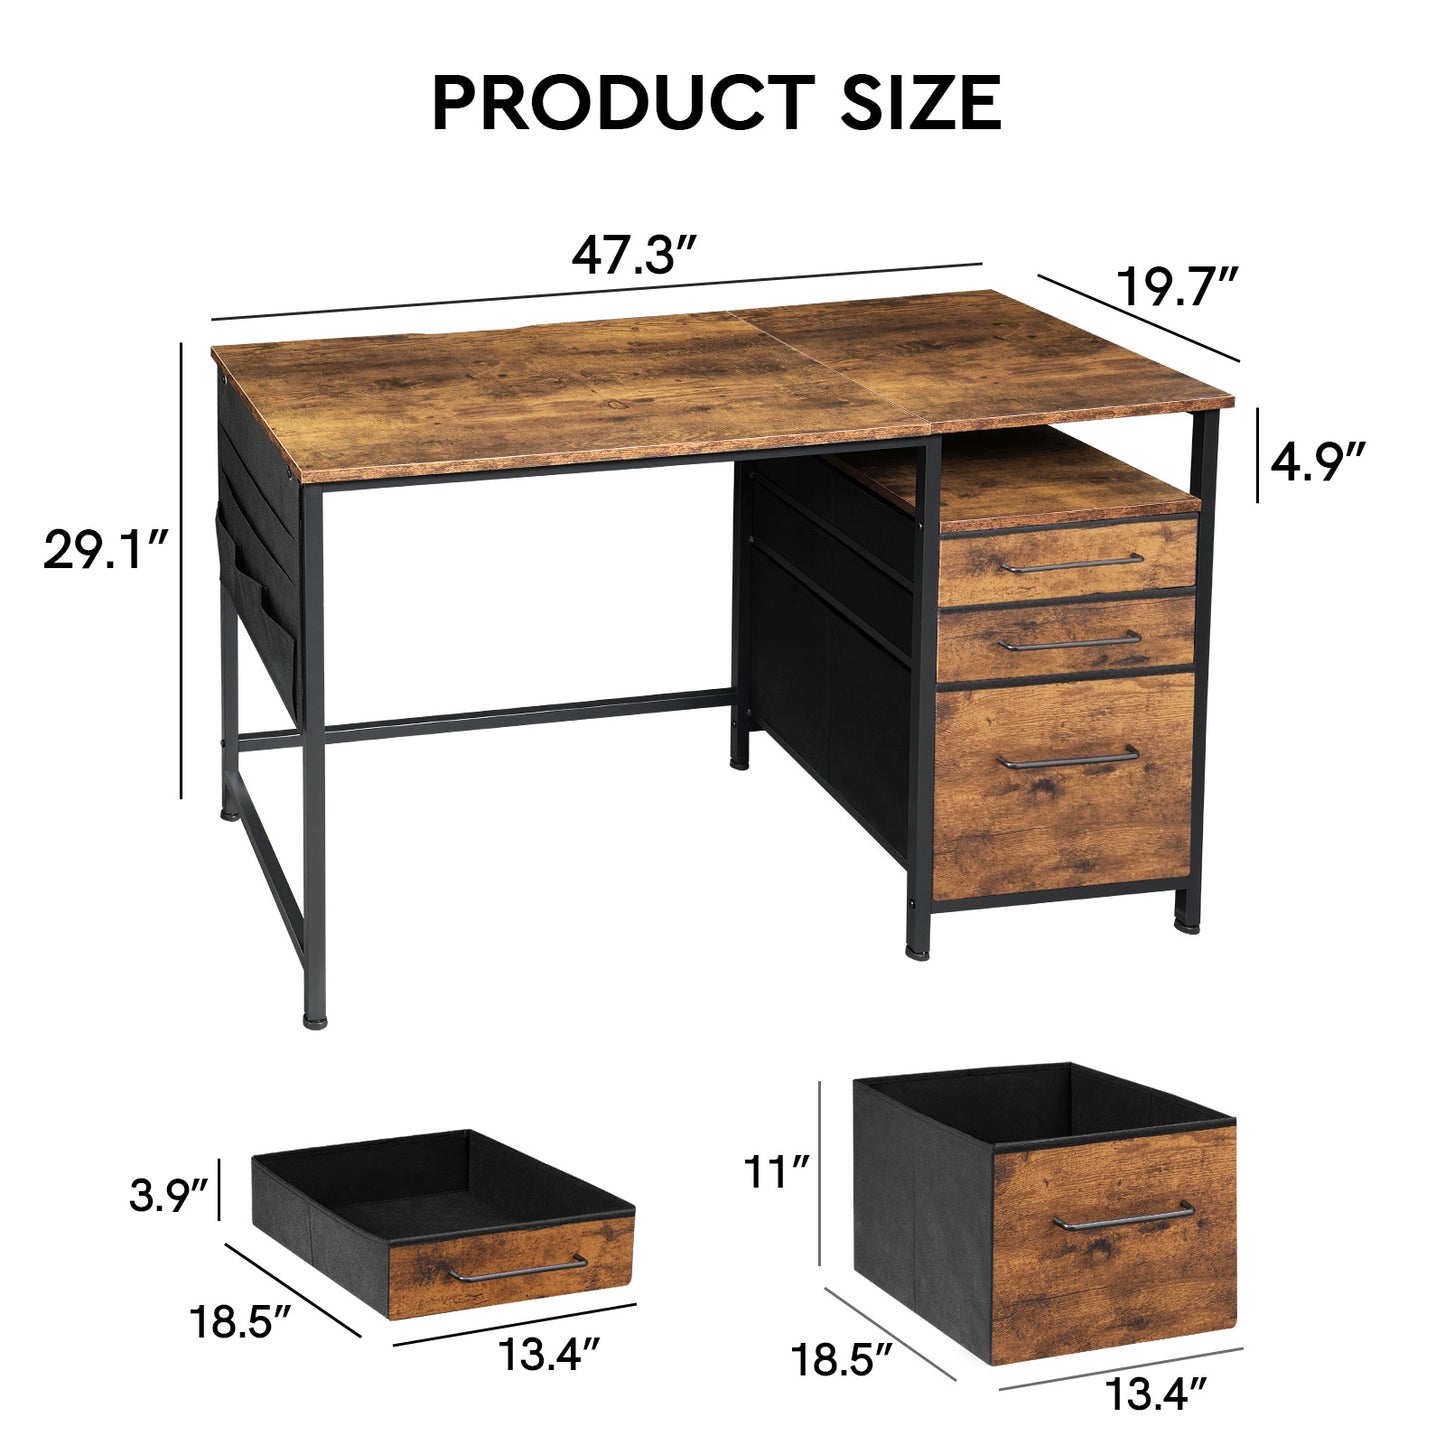 MAIHAIL 47 inch Desk with Drawers, Rustic Brown+ Black